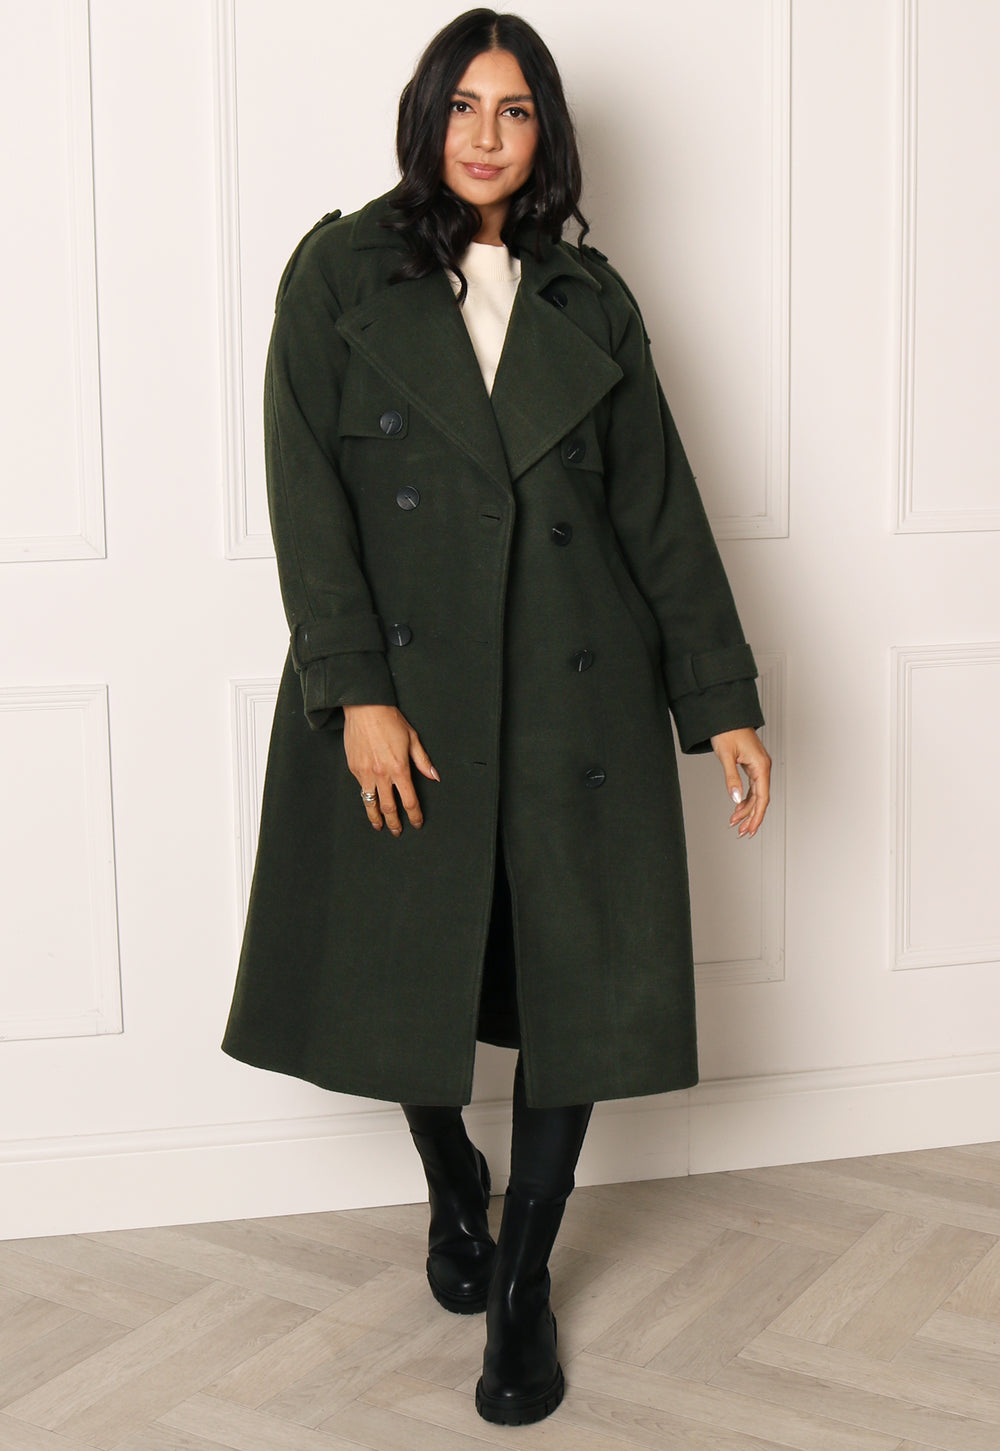 ONLY Alvina Smart Double Breasted Longline Wool Trench Coat in